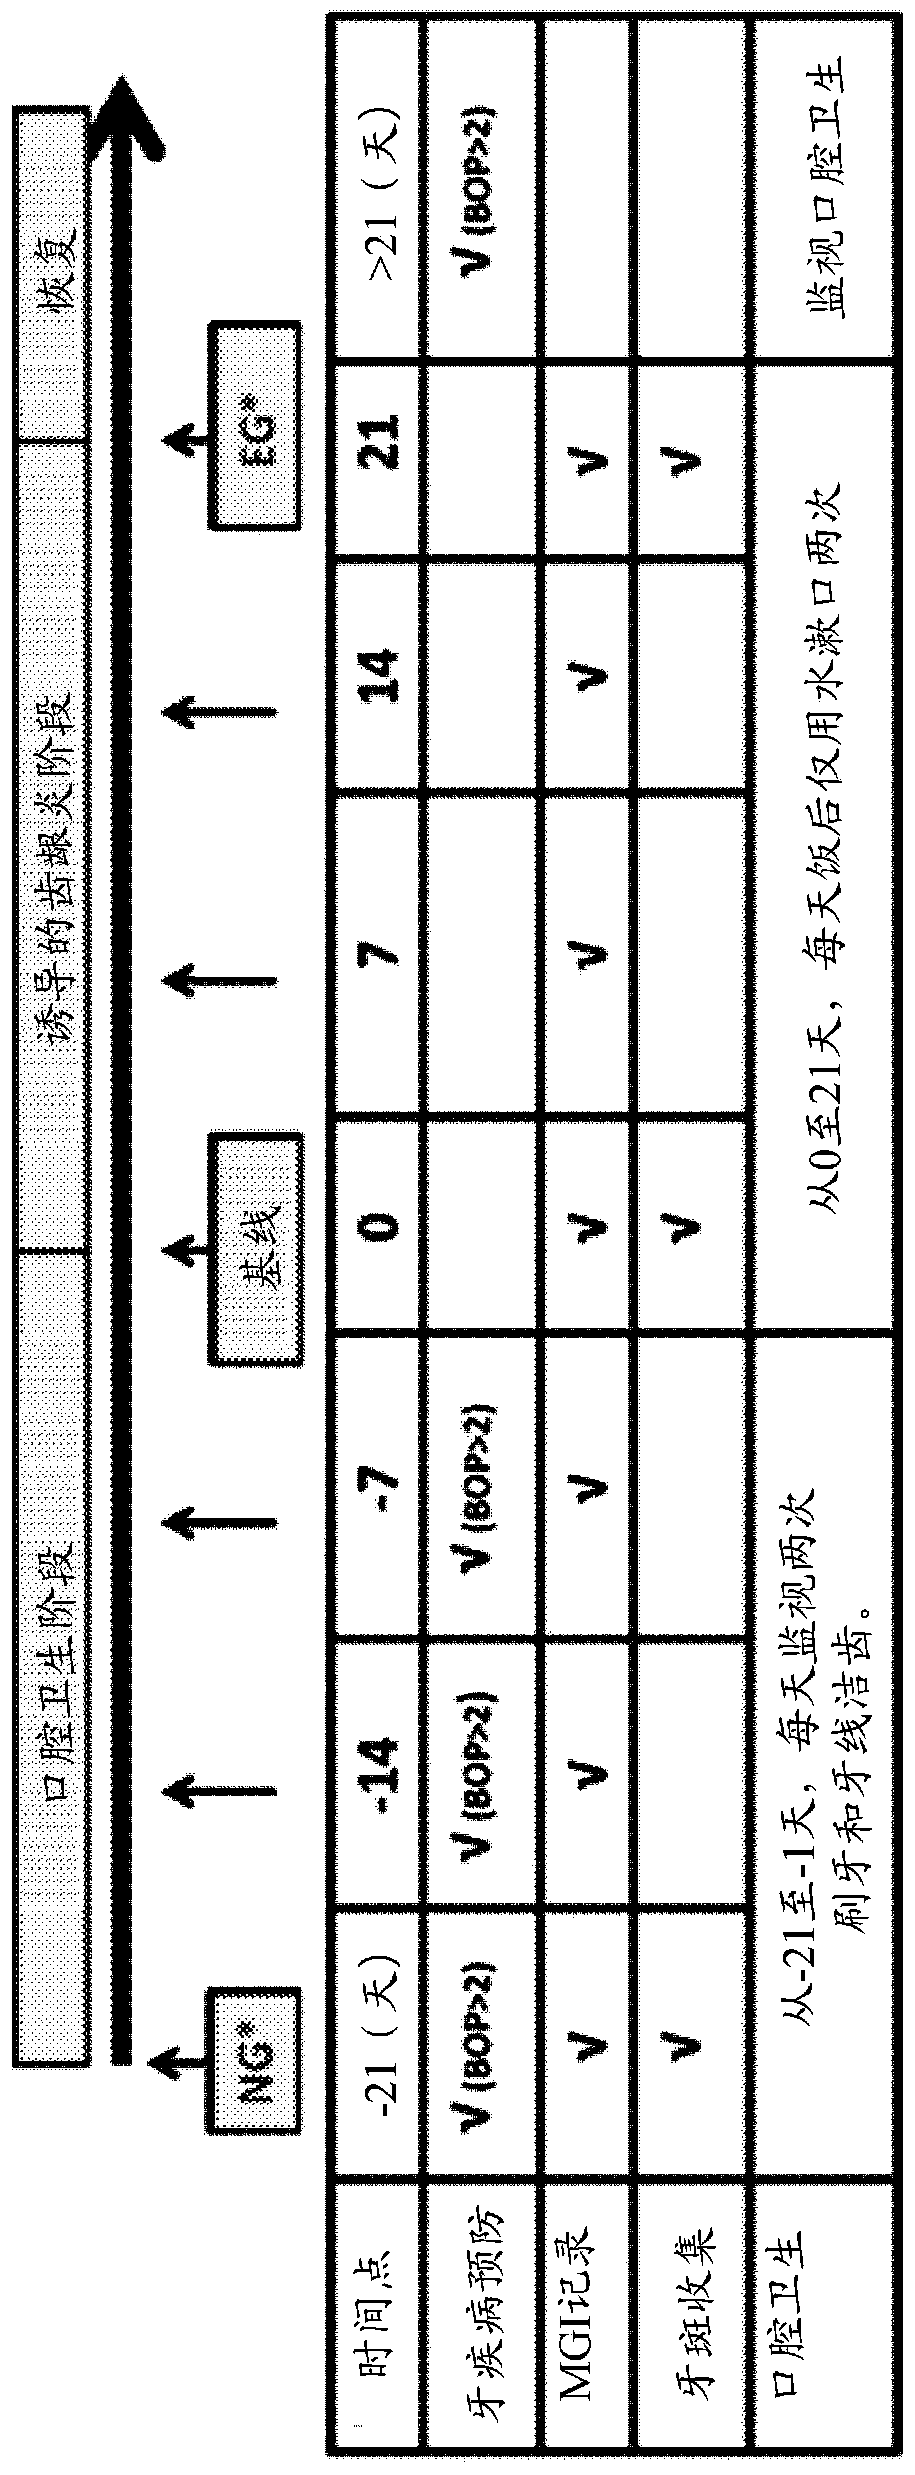 Method and system for assessing health status